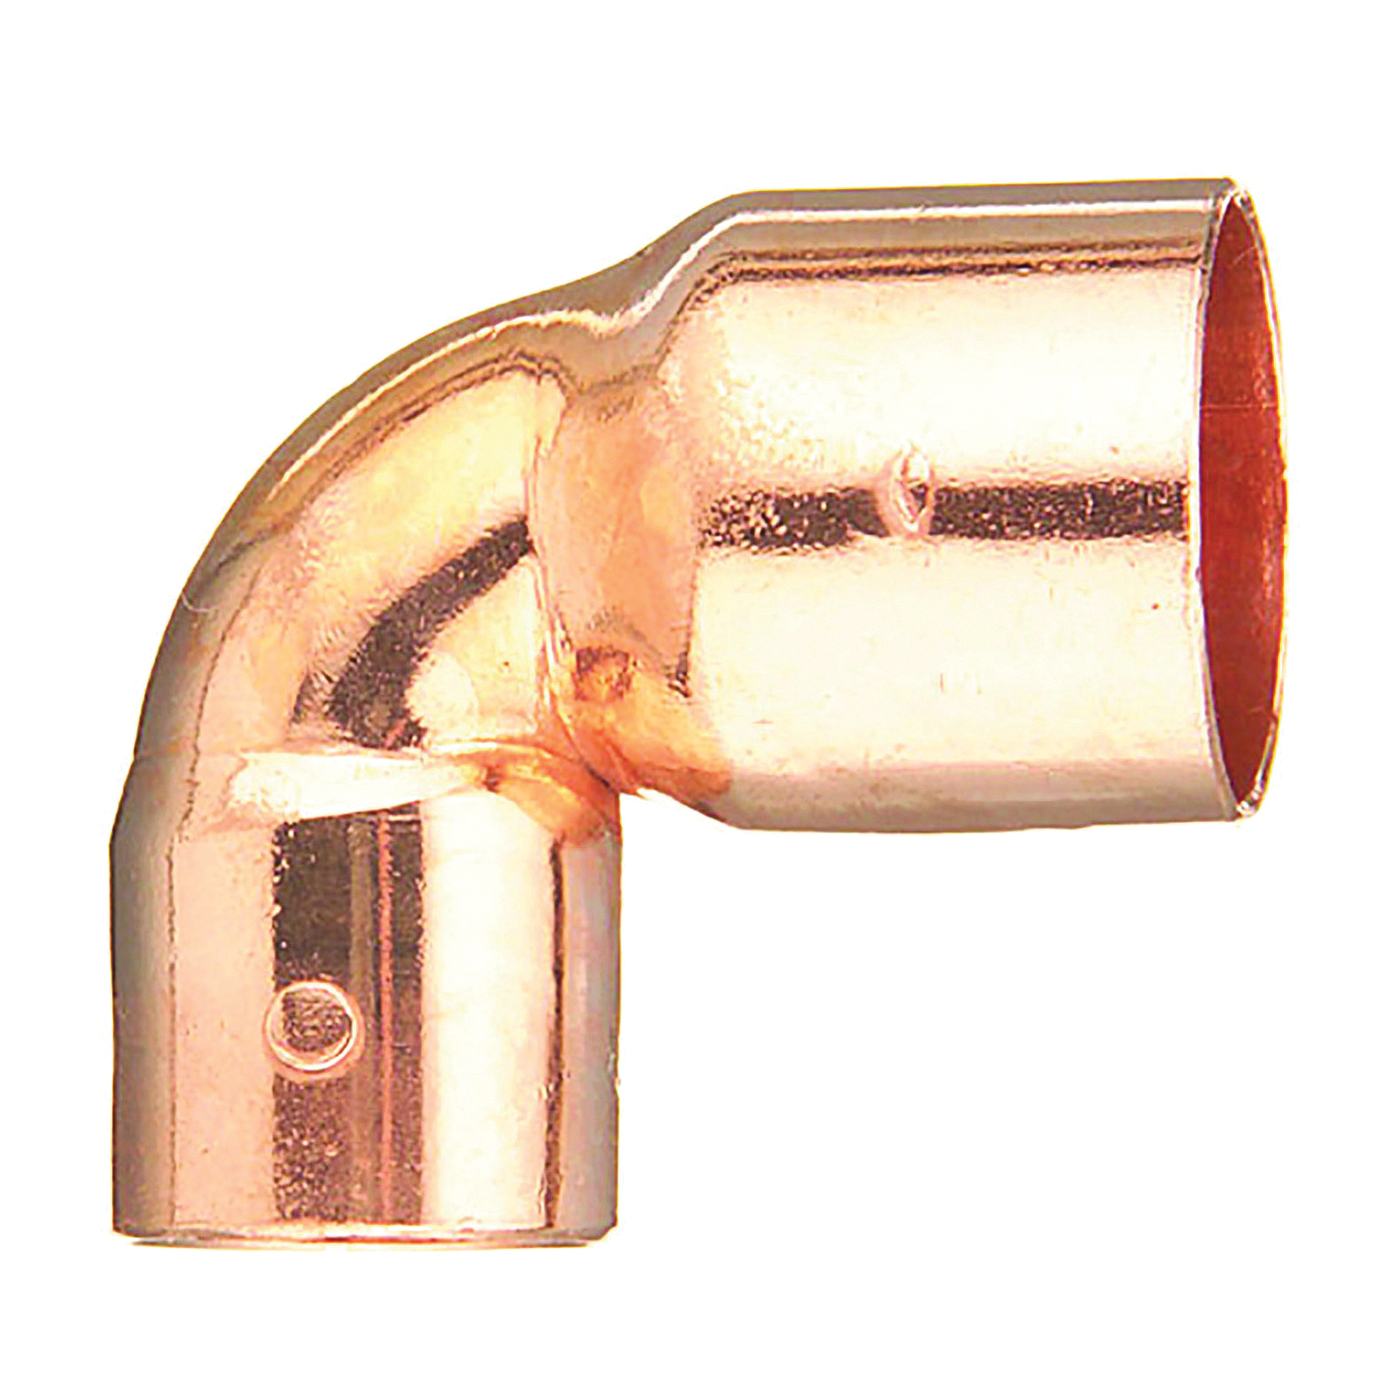 31298 Reducing Pipe Elbow, 1 x 3/4 in, Sweat, 90 deg Angle, Copper